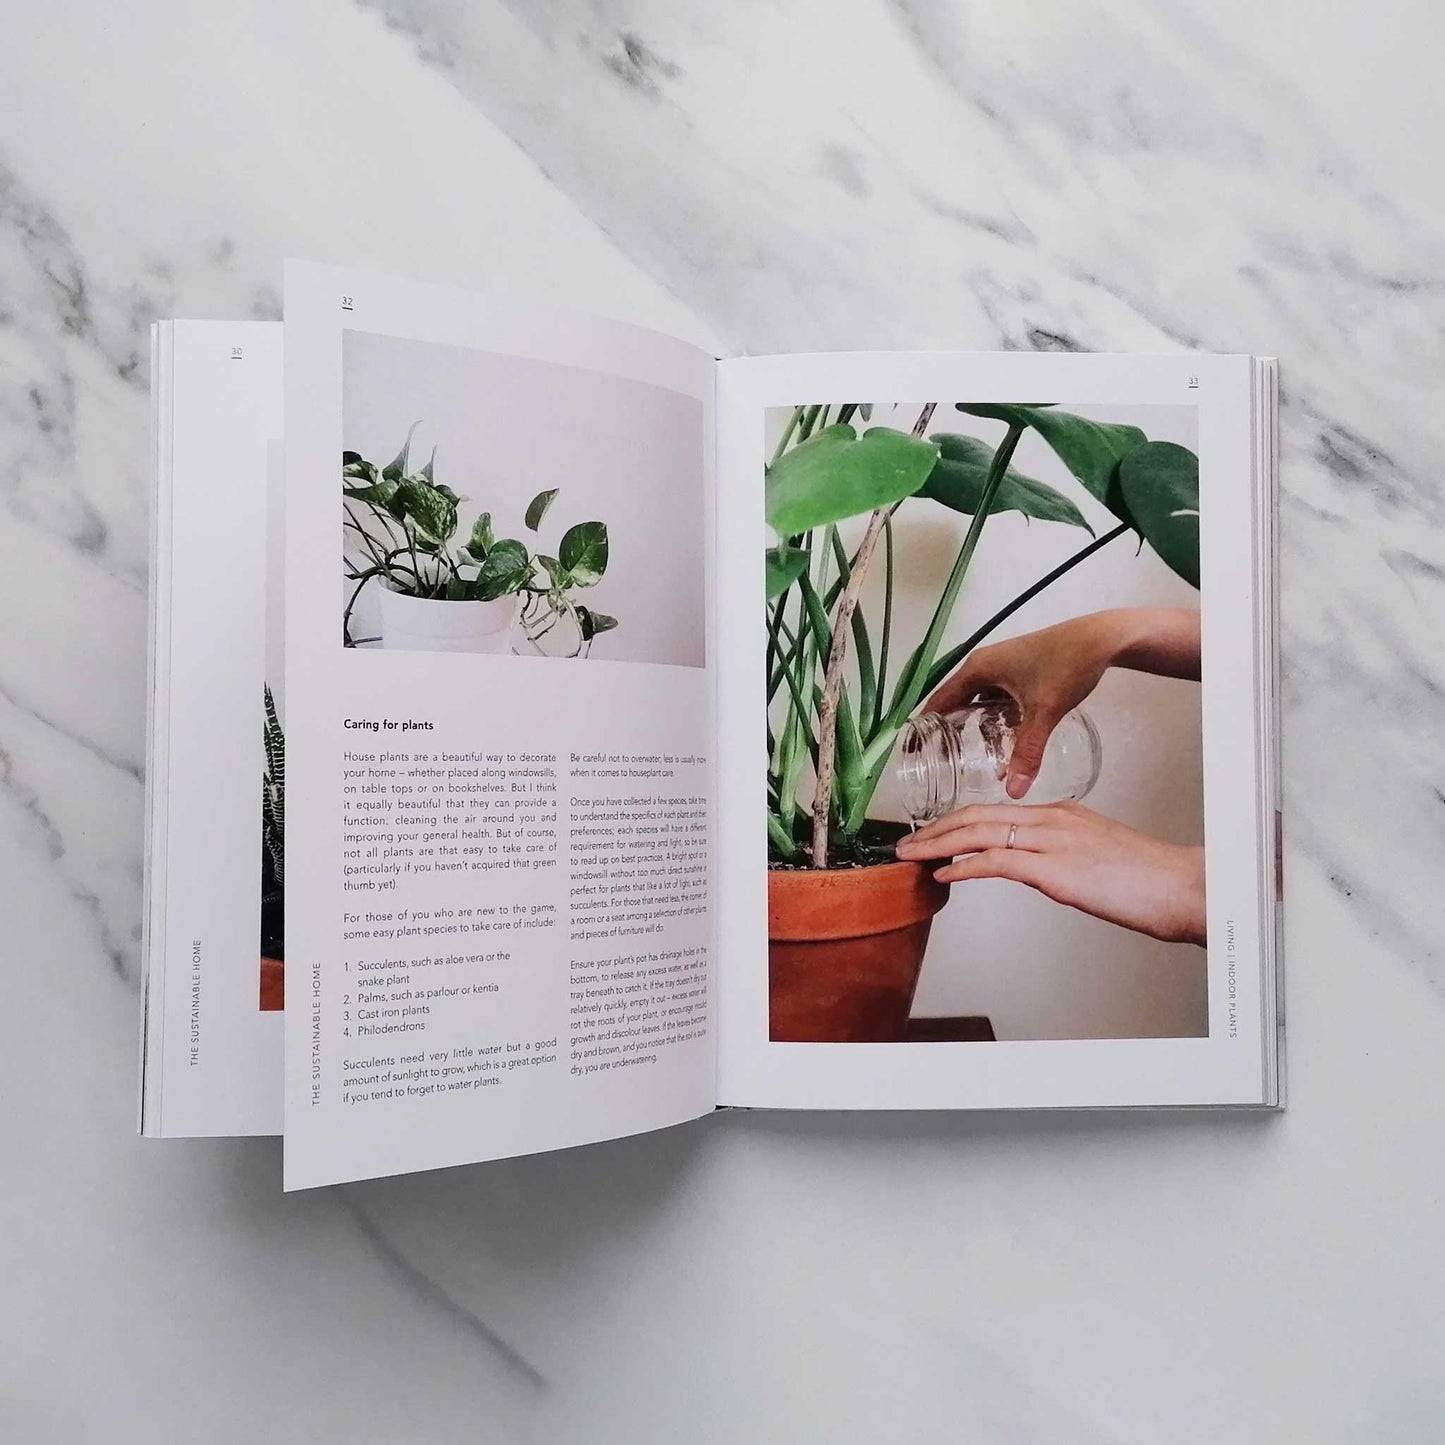 Load image into Gallery viewer, Our Bookshelf Print Books Sustainable Home : Practical projects, tips and advice for maintaining a more eco-friendly household
